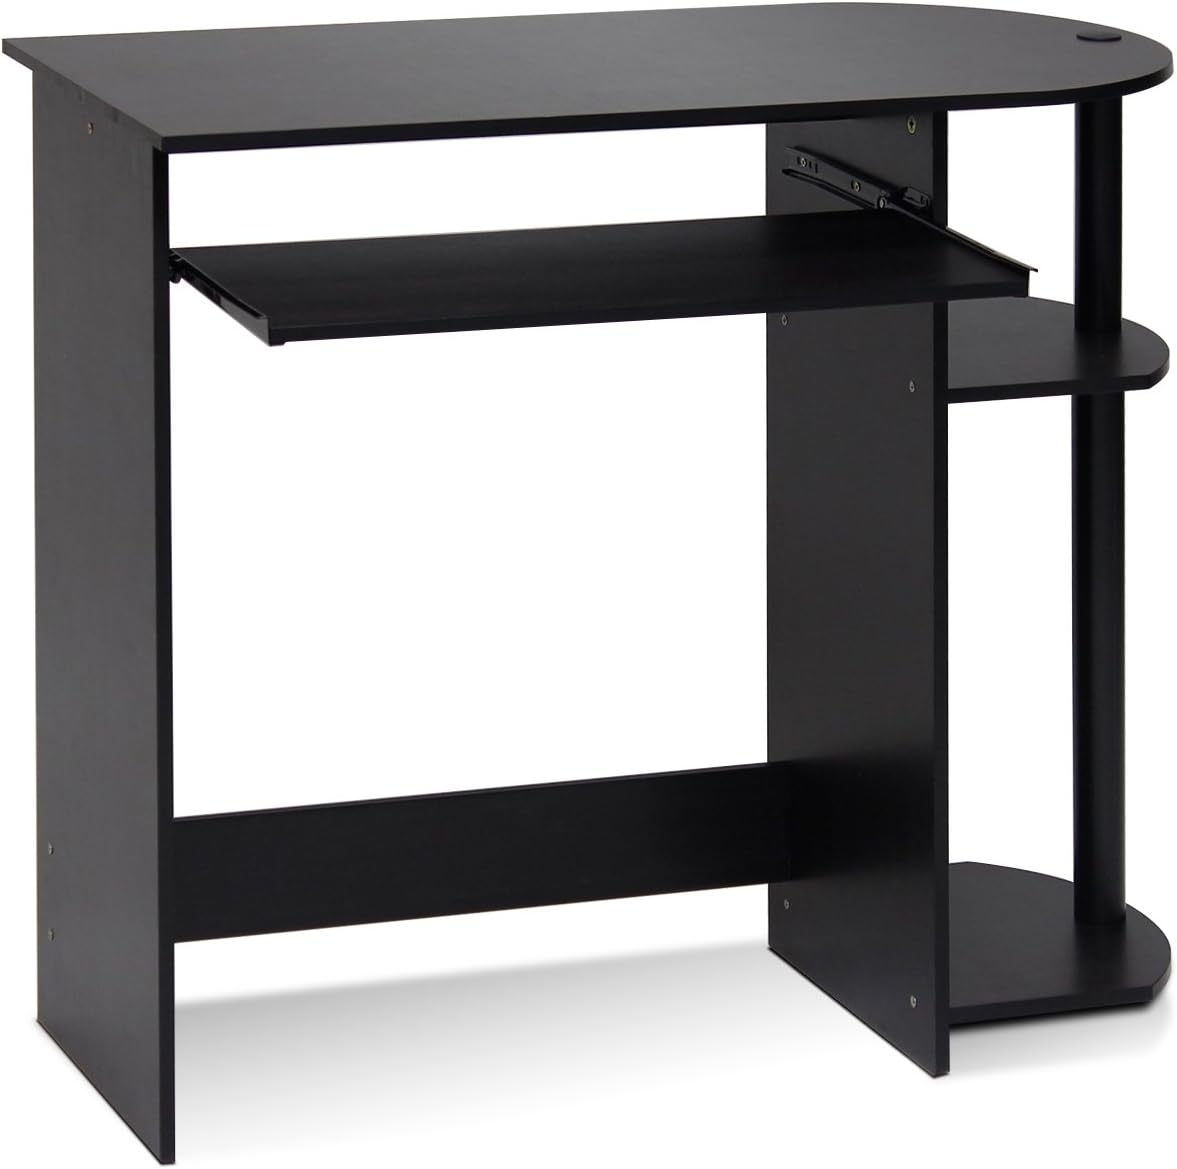 Compact black computer desk with a pull-out keyboard tray and lower shelf